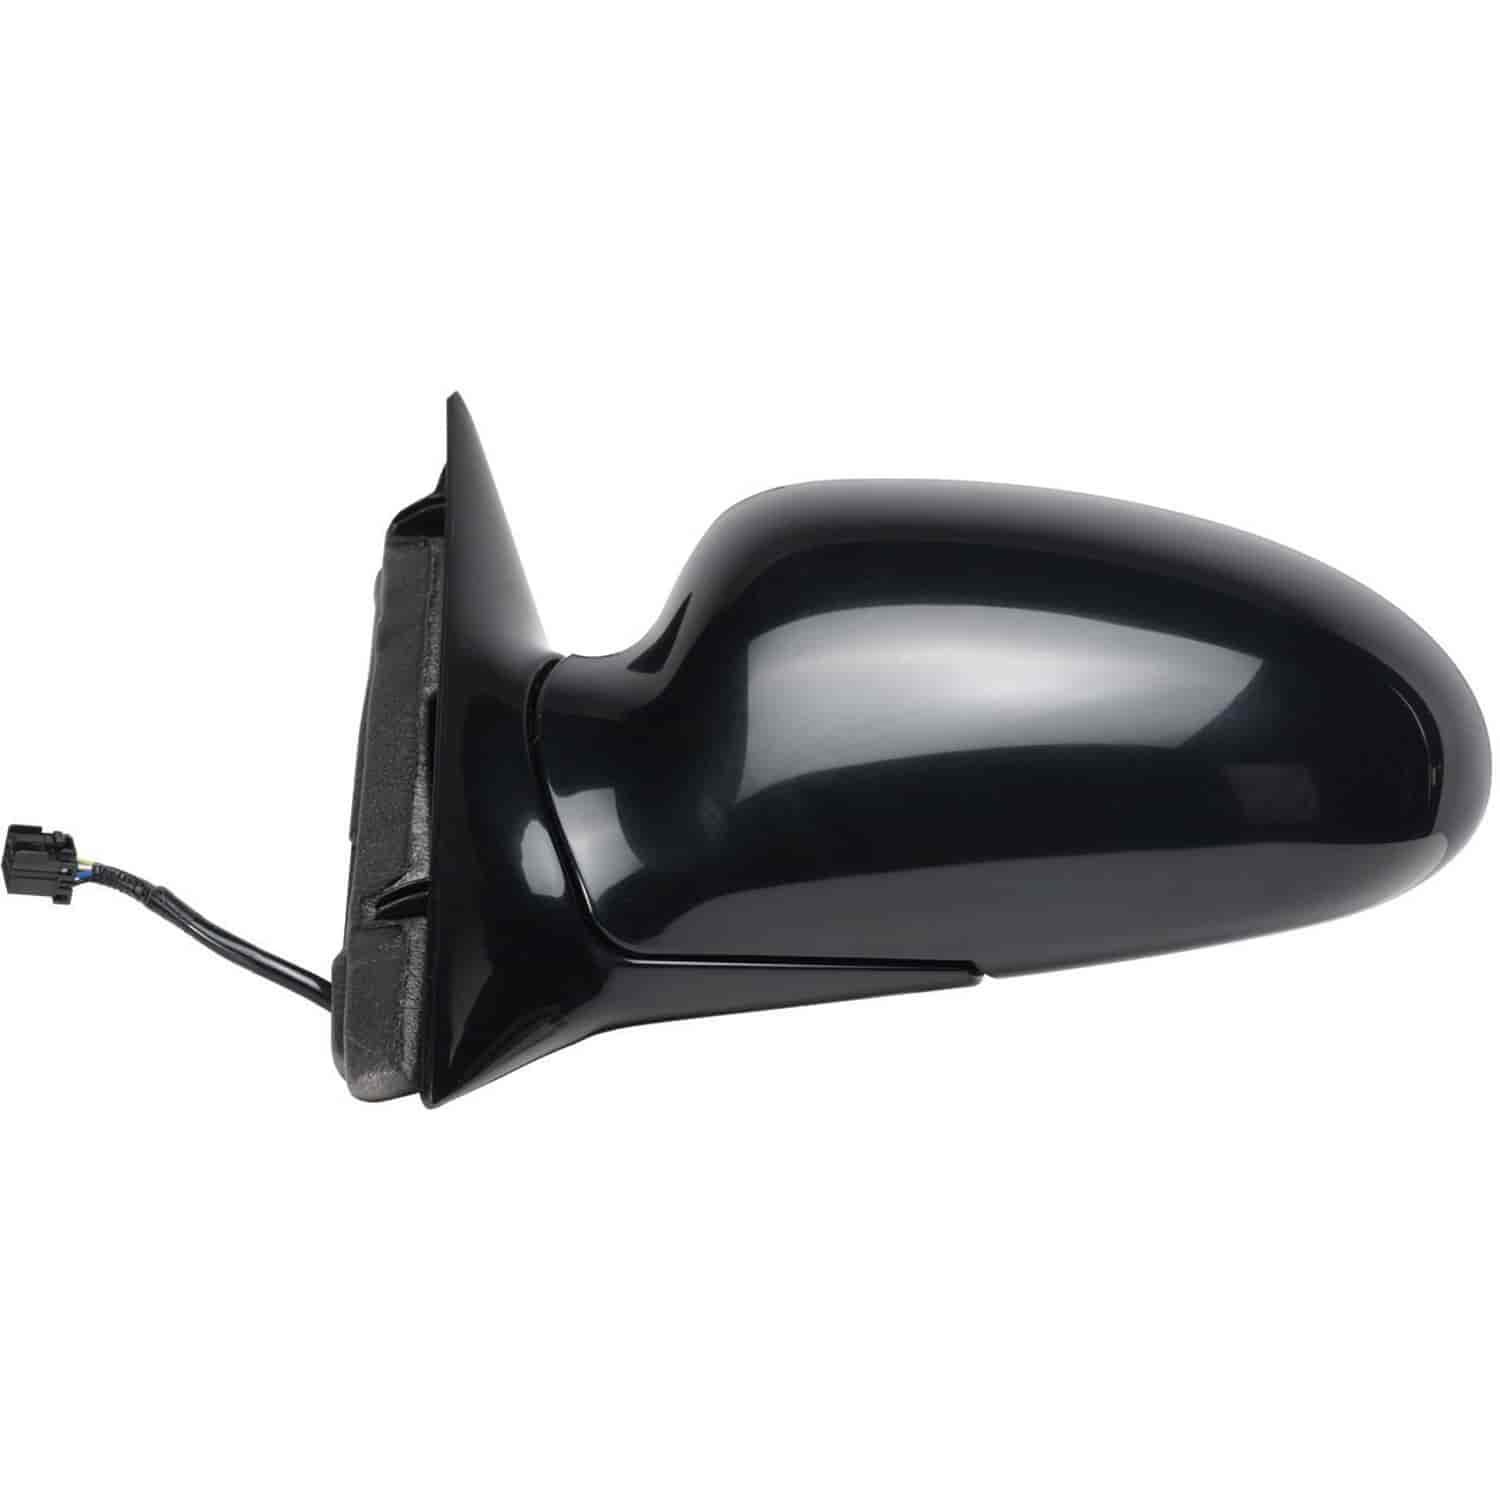 OEM Style Replacement mirror for 00-05 Buick Le Sabre w/o memory driver side mirror tested to fit an